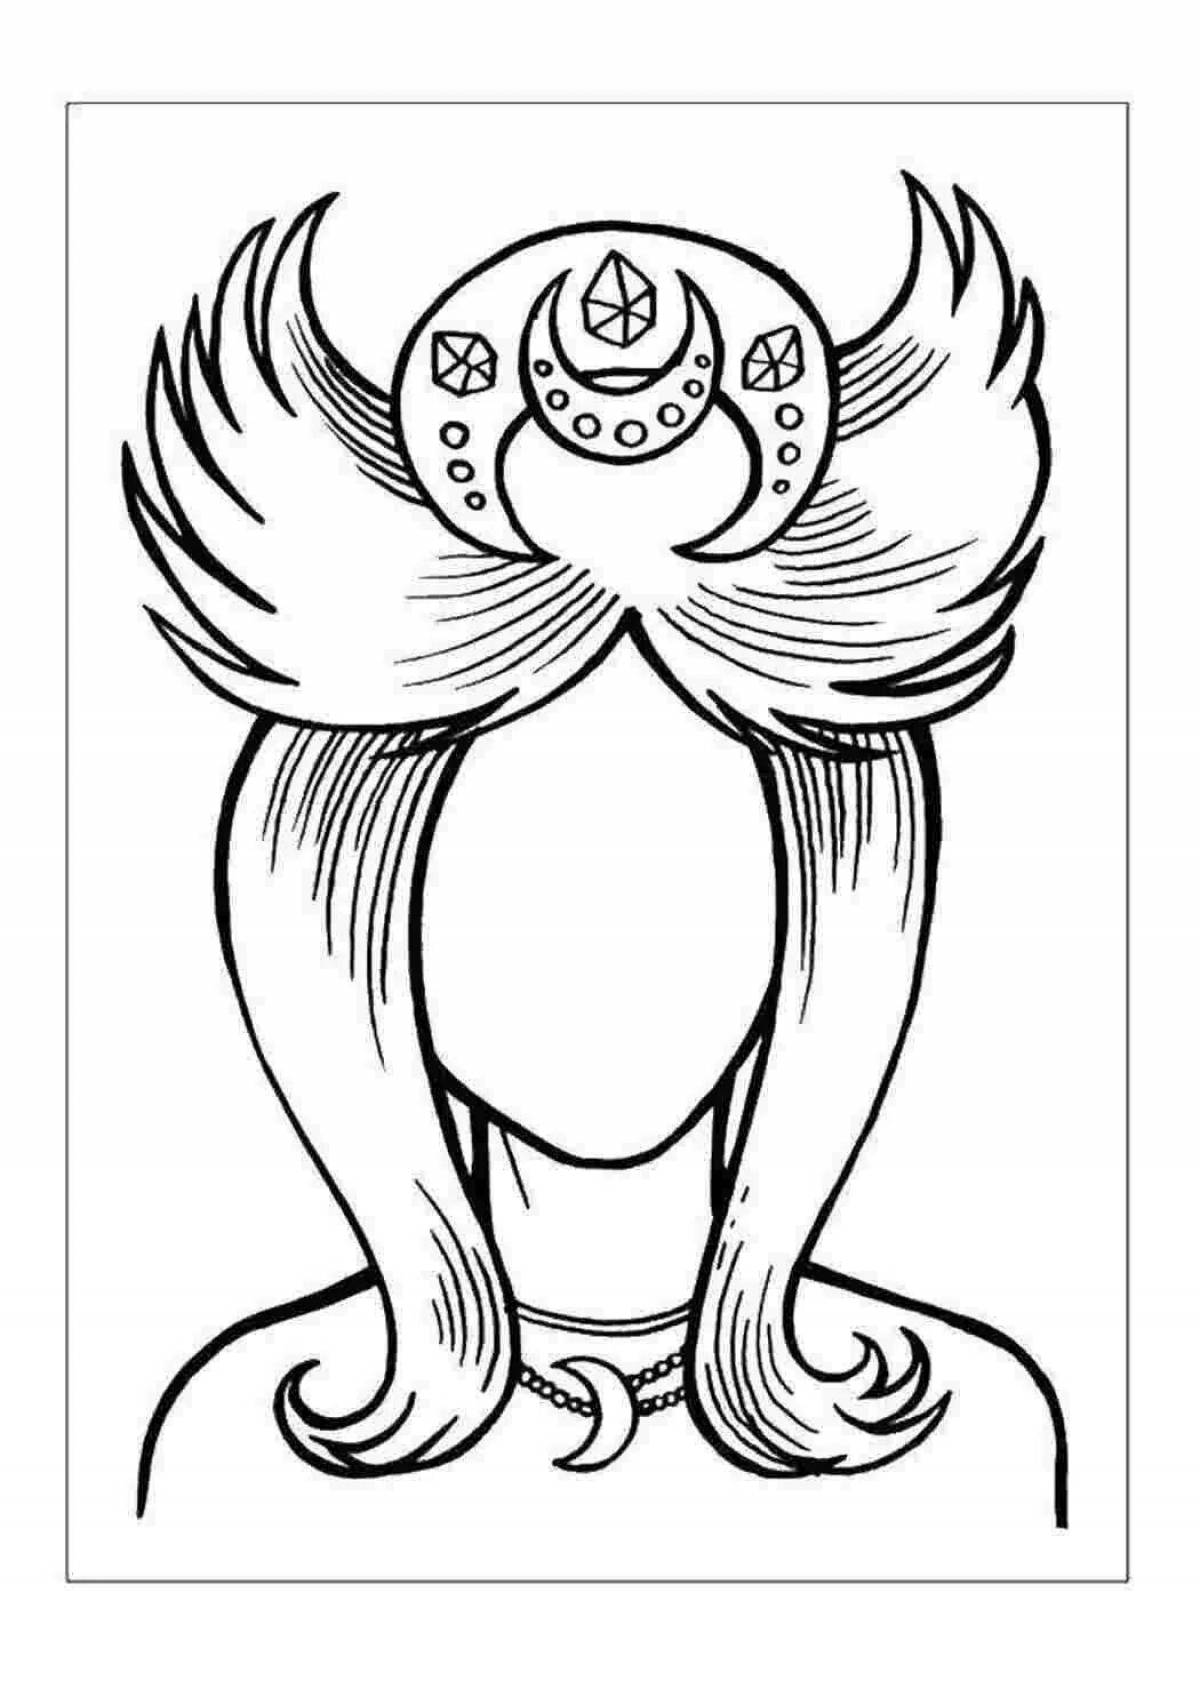 Jolly face coloring page